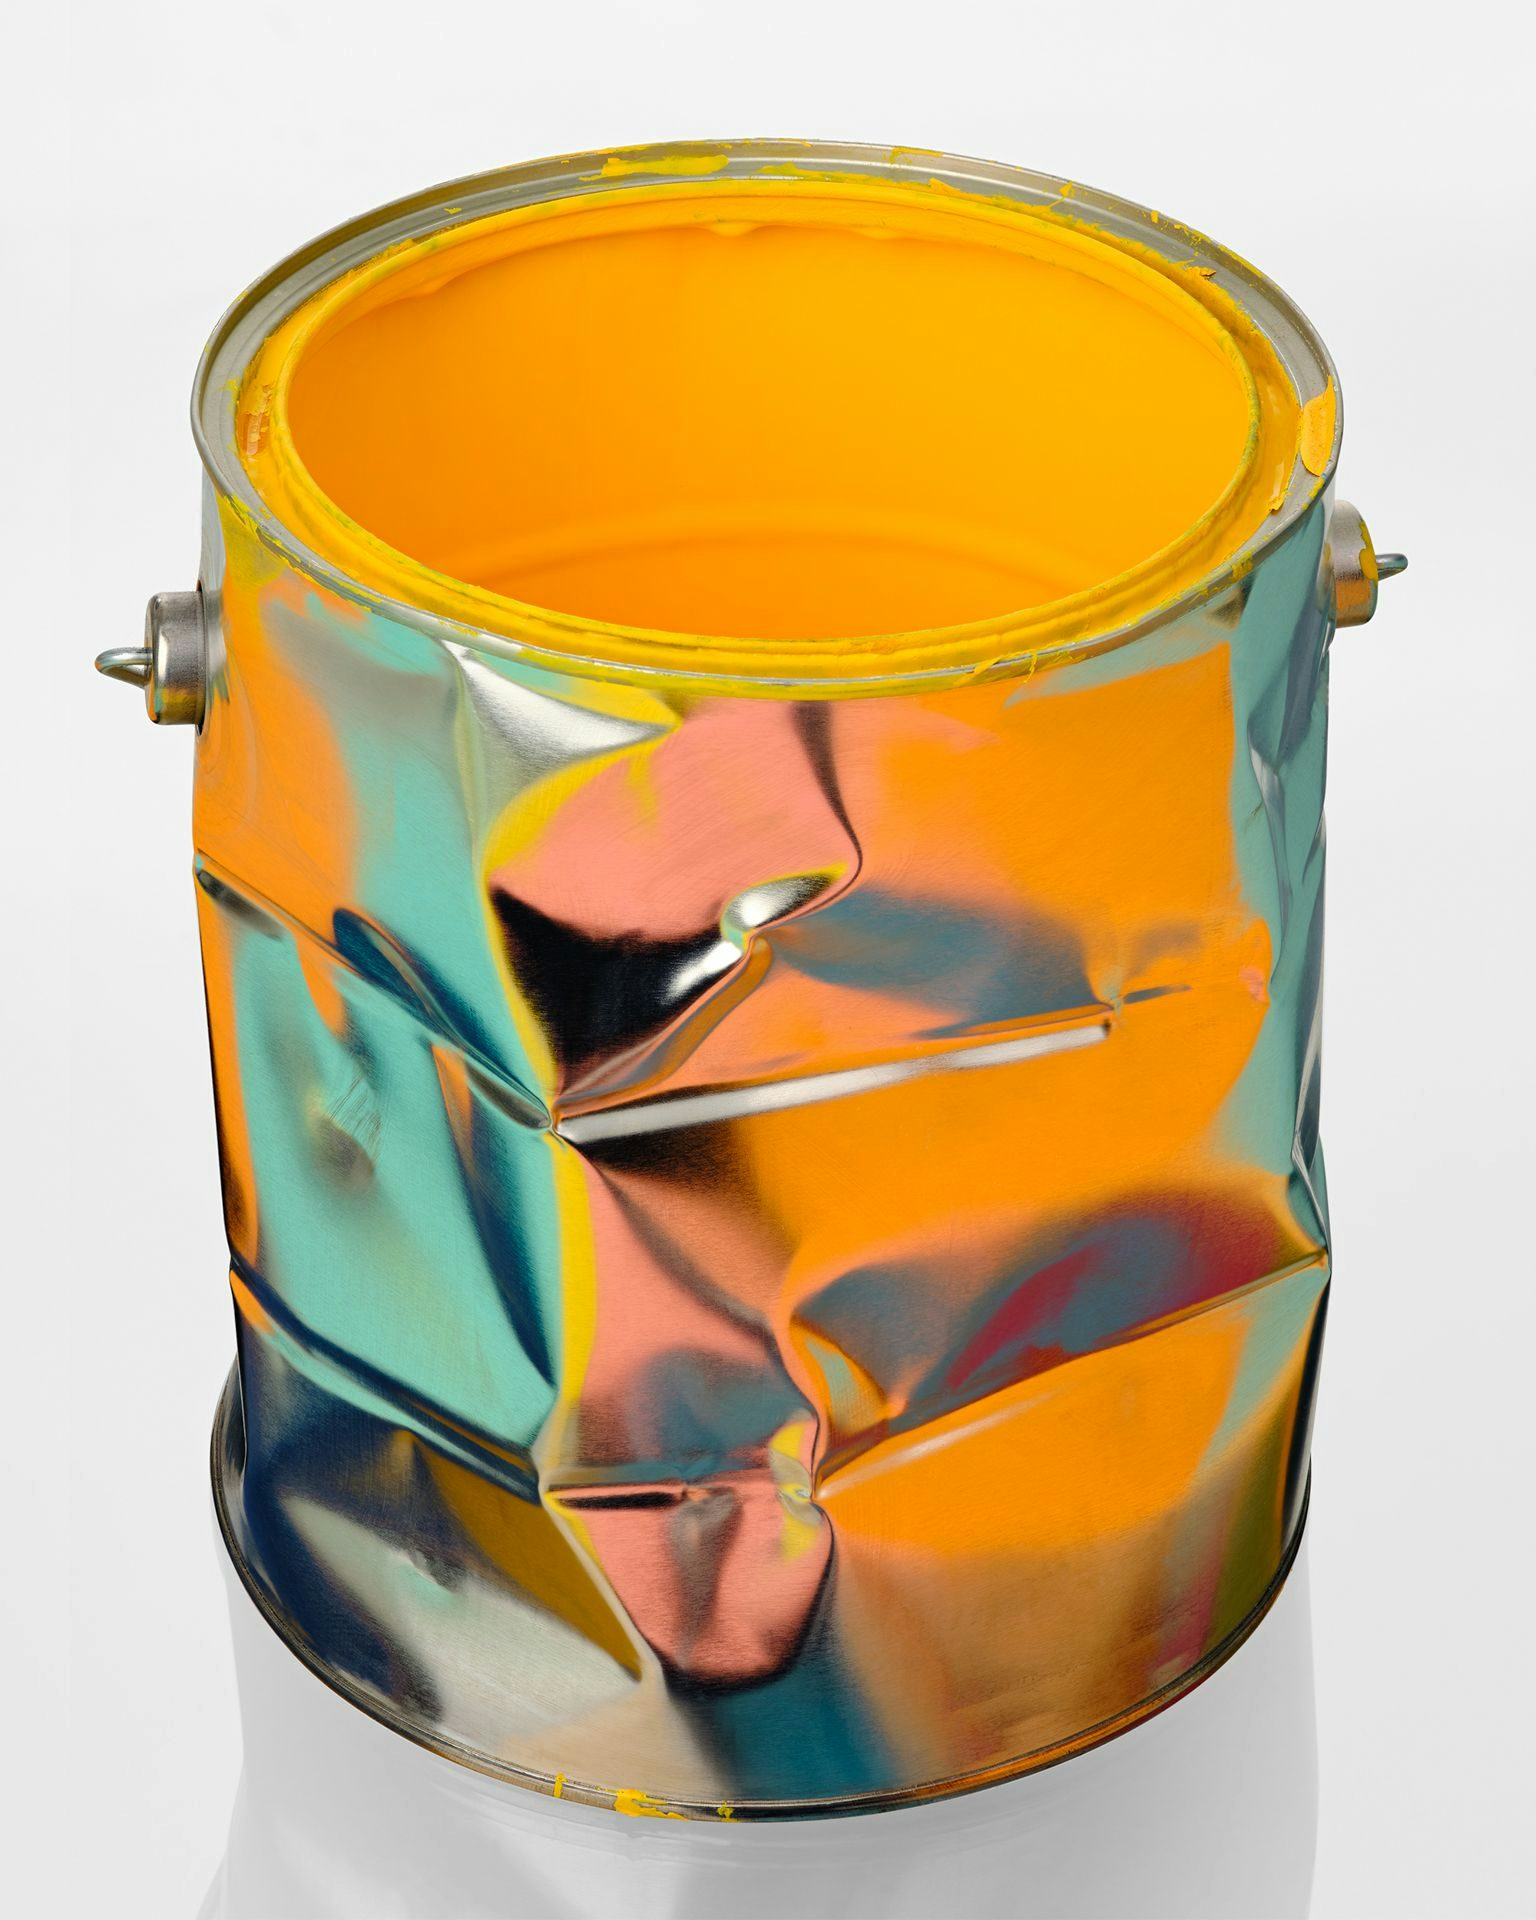 An old paint can reflecting light.